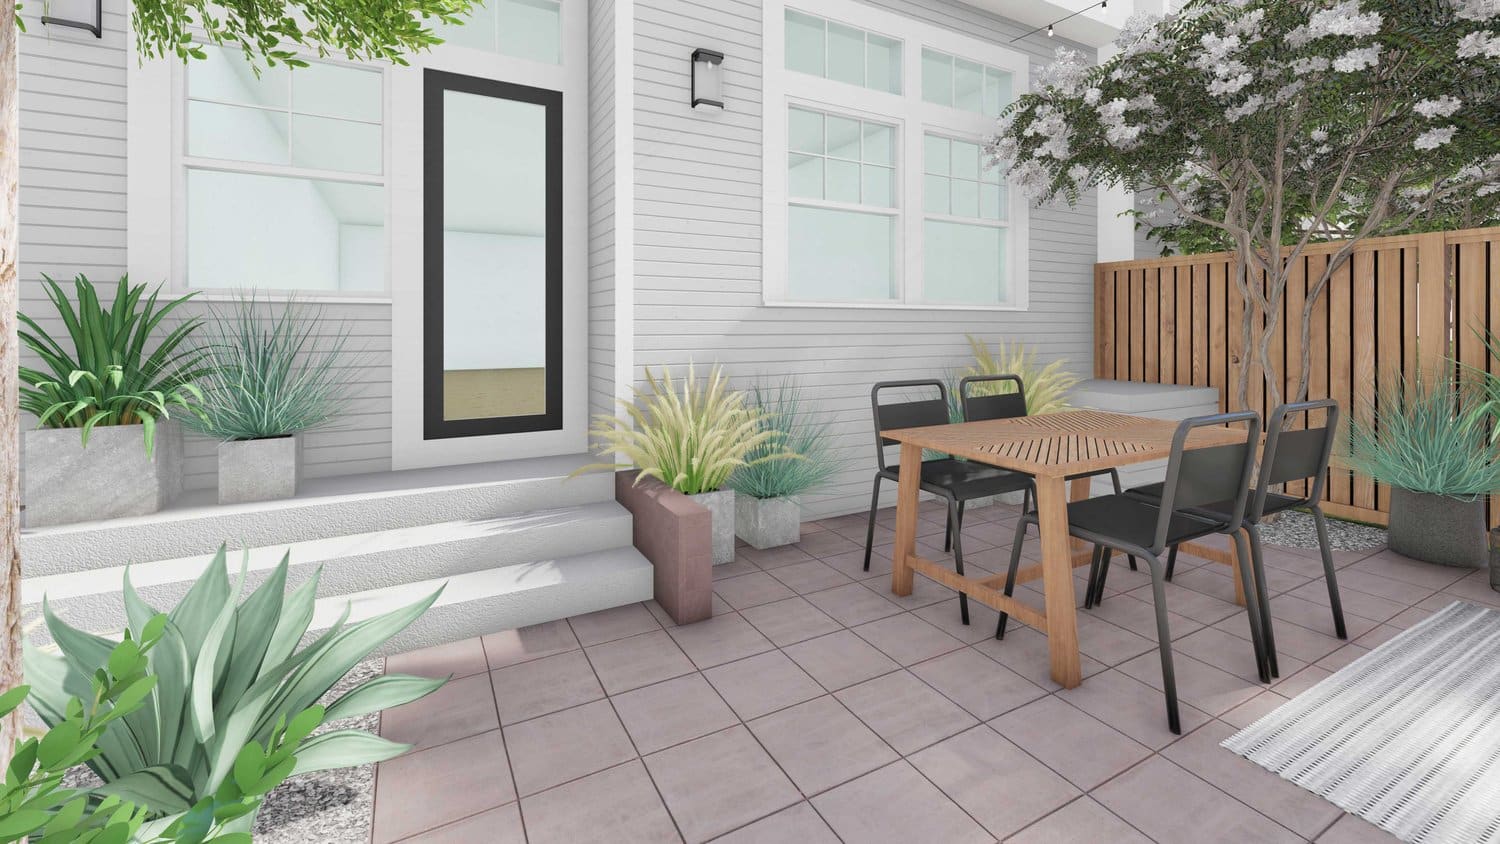 front yard with concrete paver flooring, concrete steps, plants and tree in gravel, alongside planters and dining area